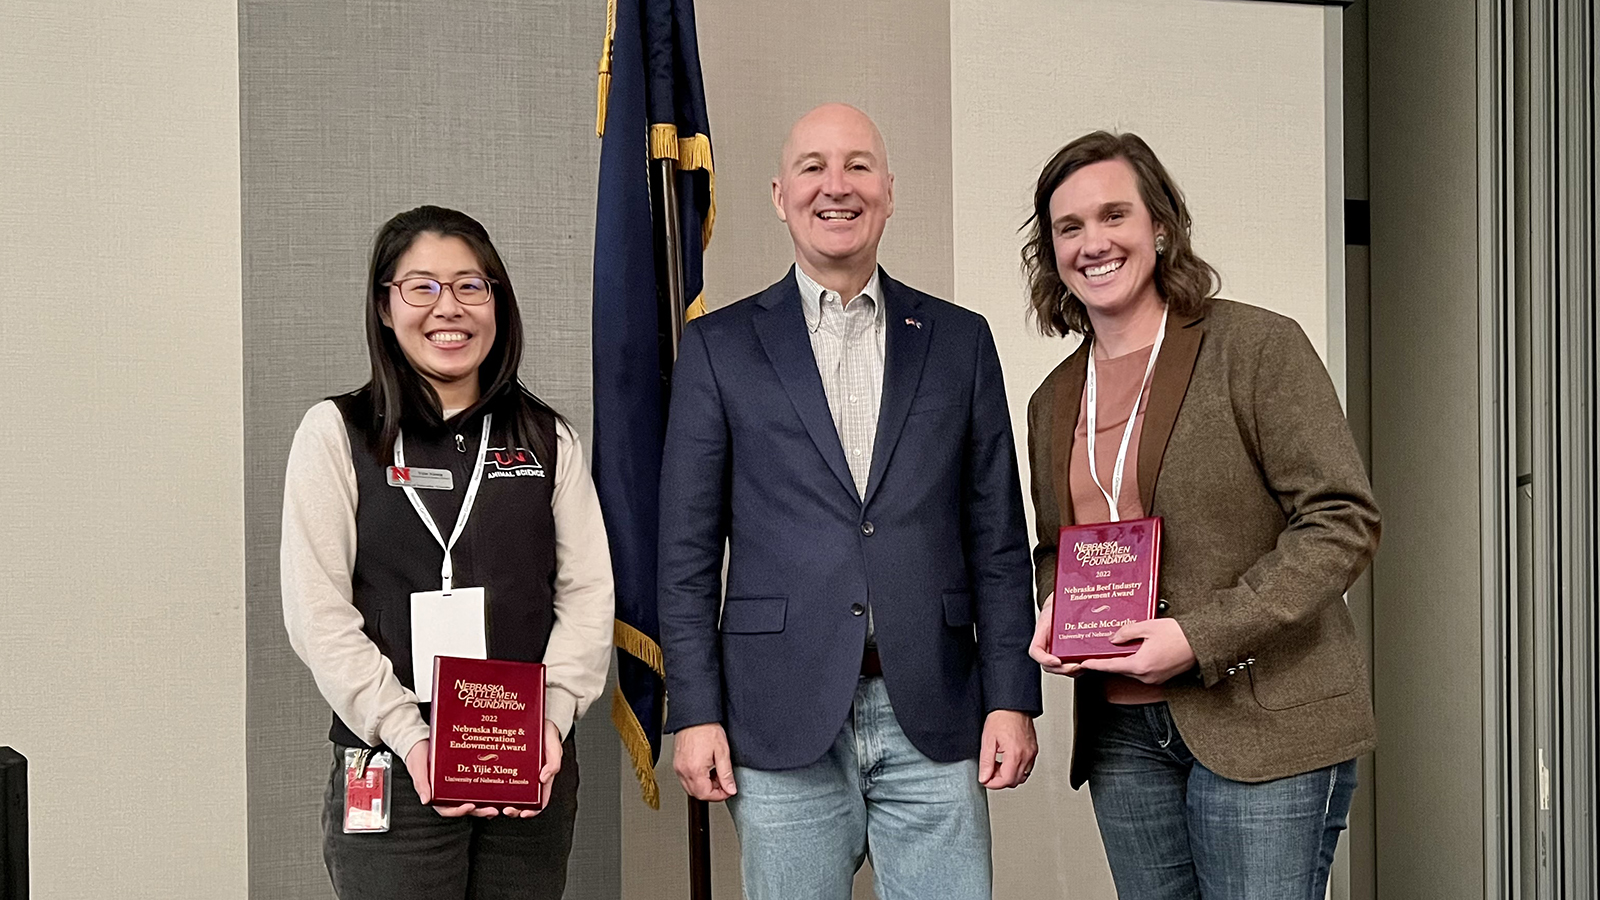 Dr. Yijie Xiong, Governor Pete Ricketts, and Dr. Kacie McCarthy